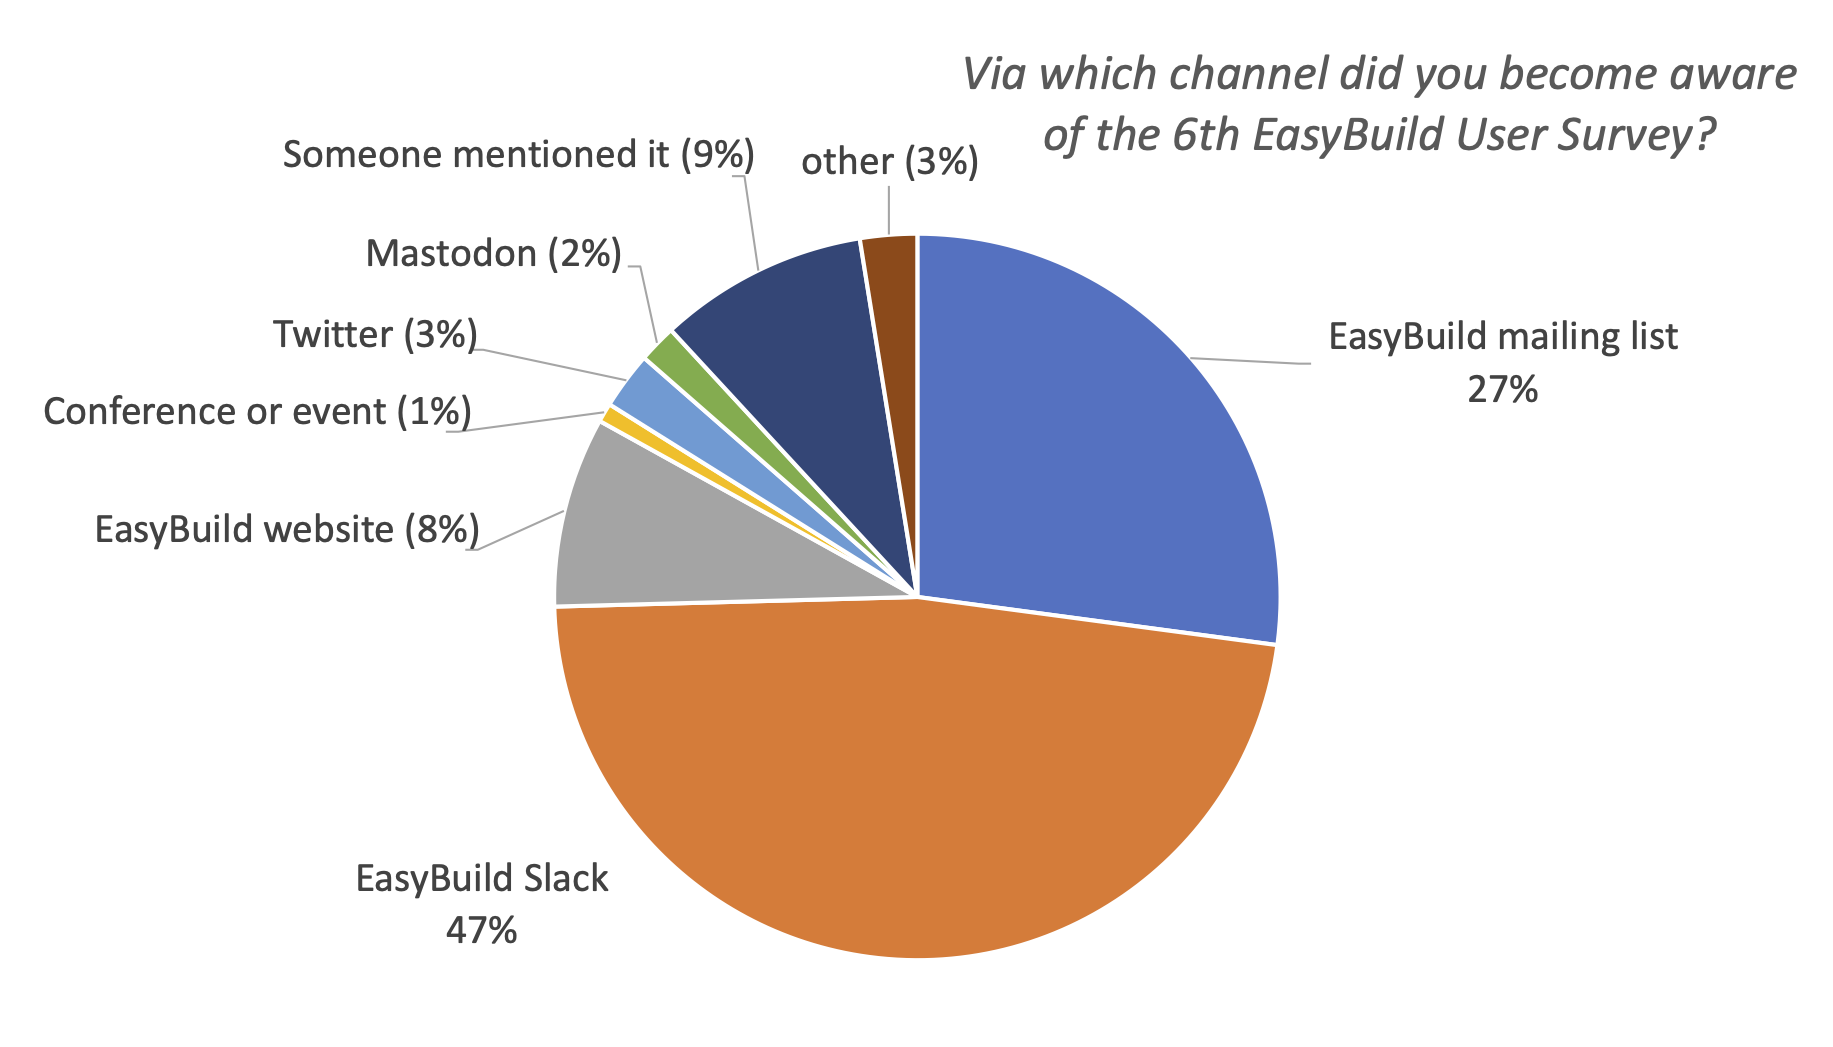 01. Via which channel did you become aware of the 6th EasyBuild User Survey?